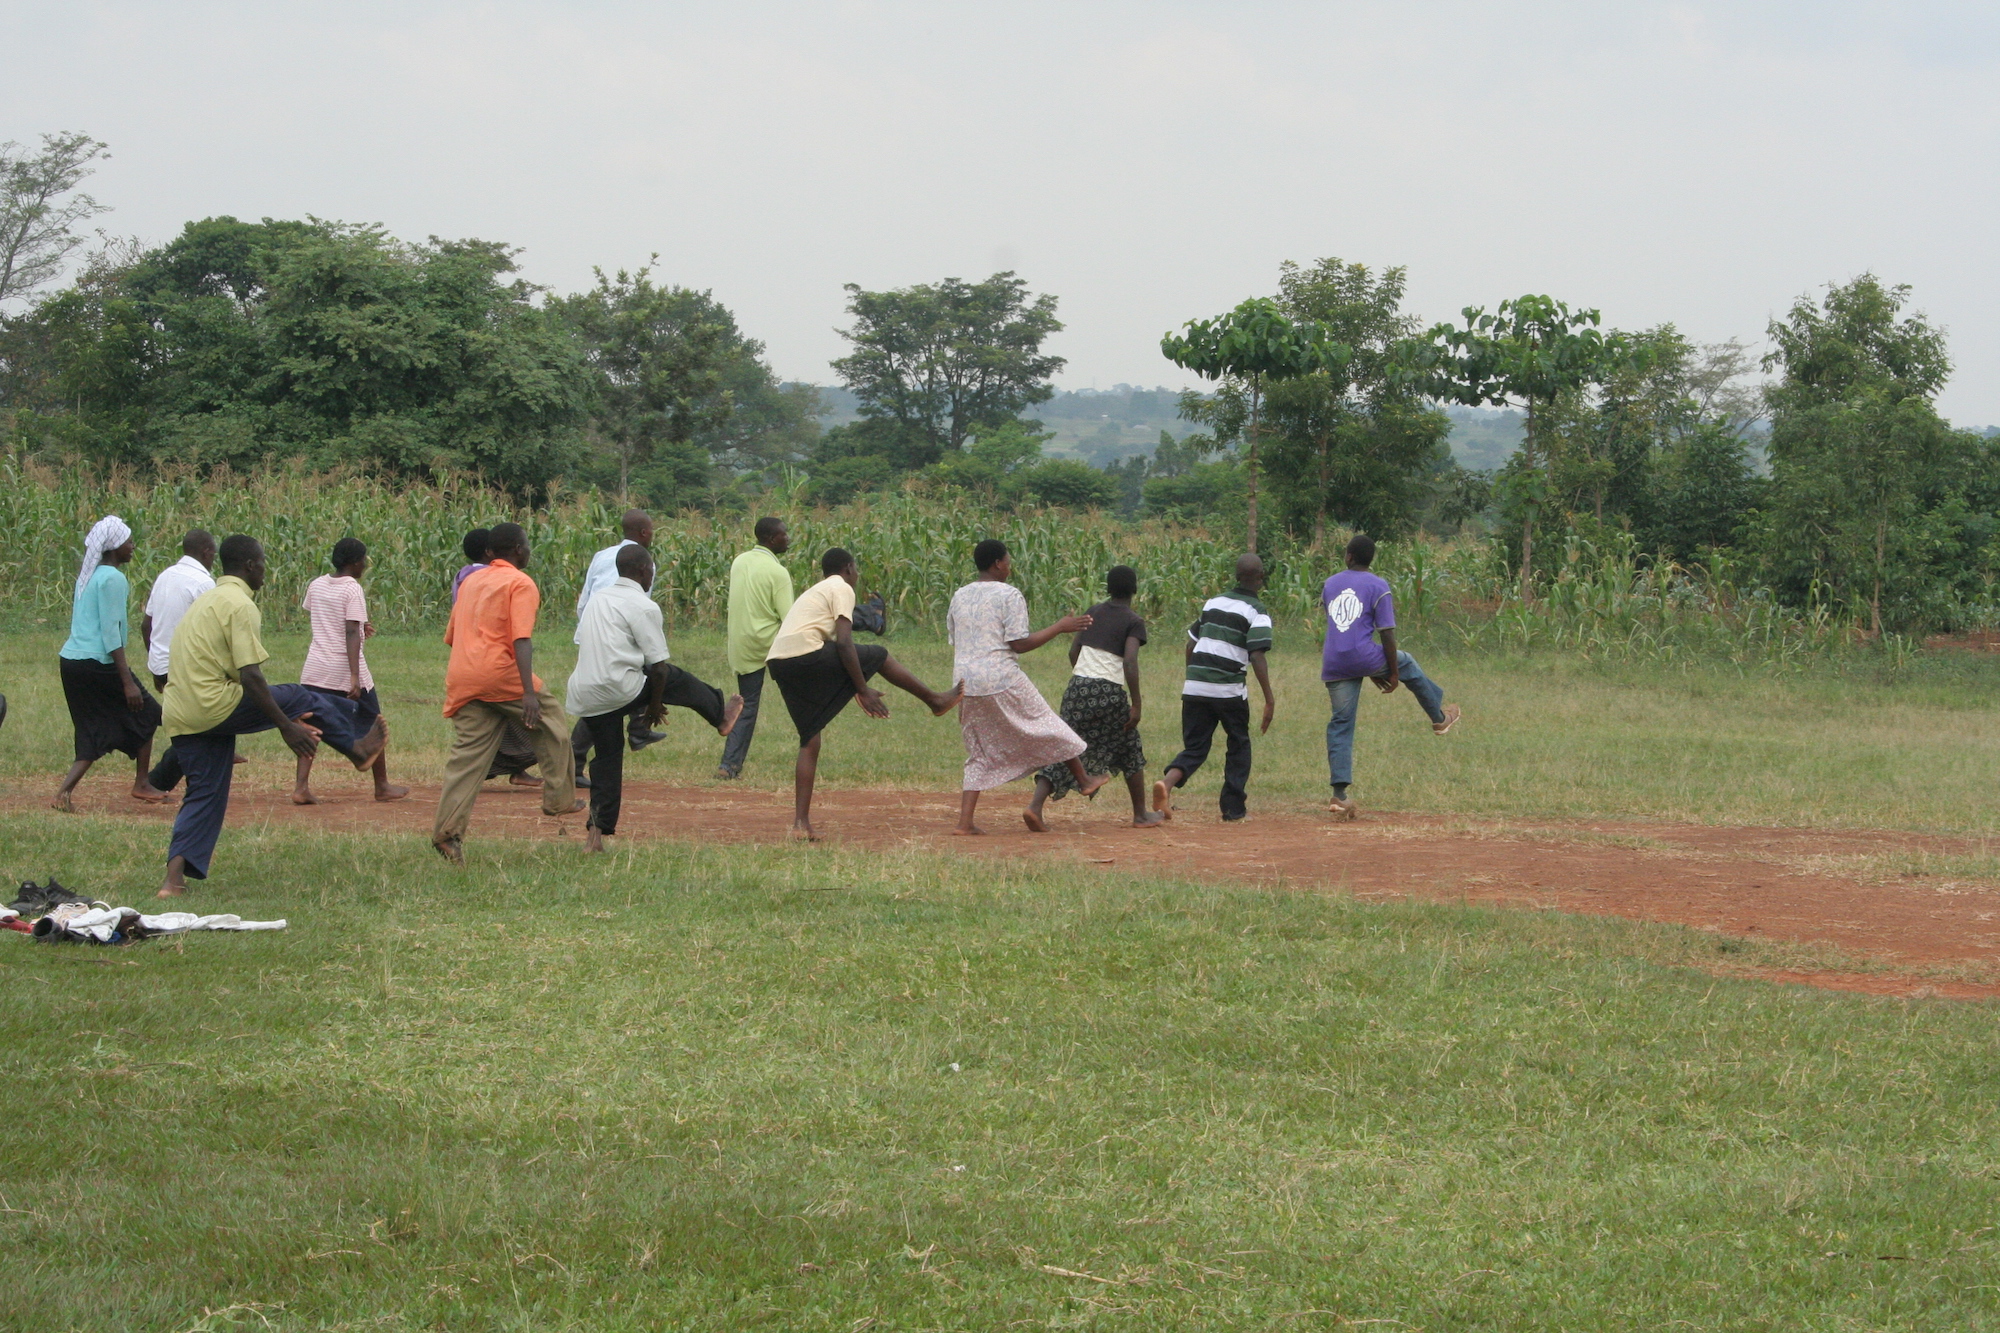 Kids doing an exercise in a field